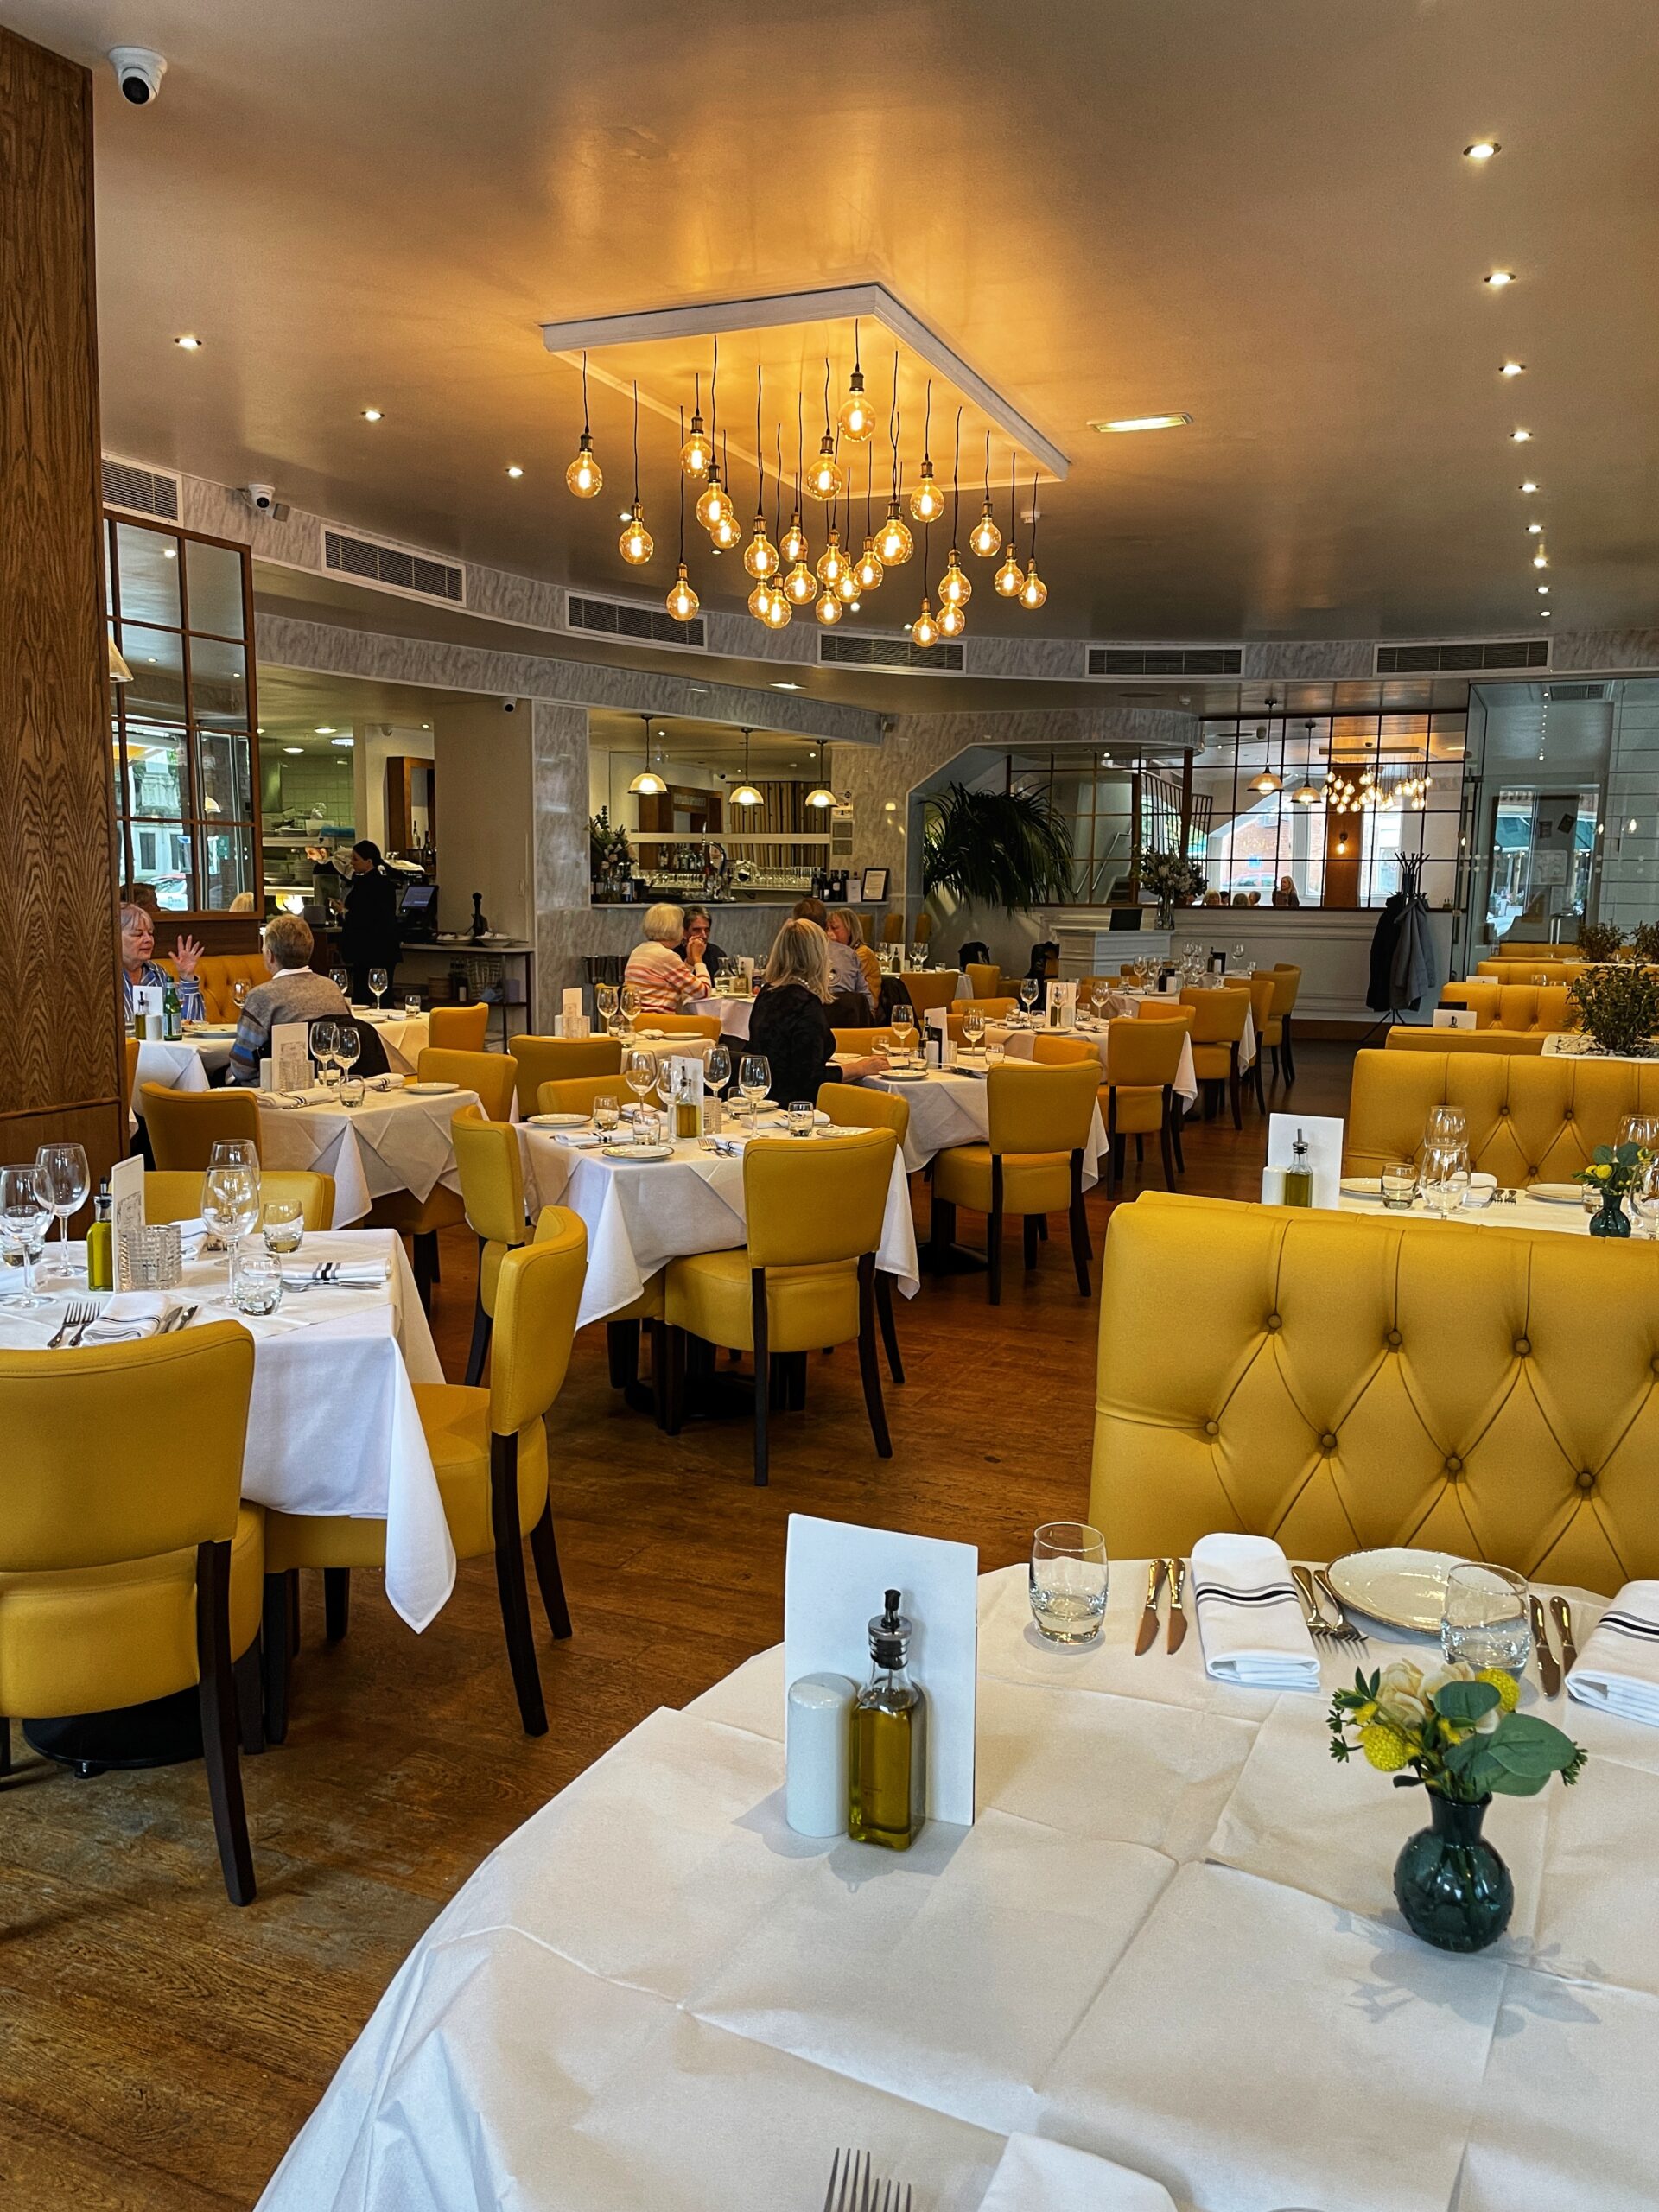 Inside Italiana 55 in Manchester, which is open on Christmas Day.